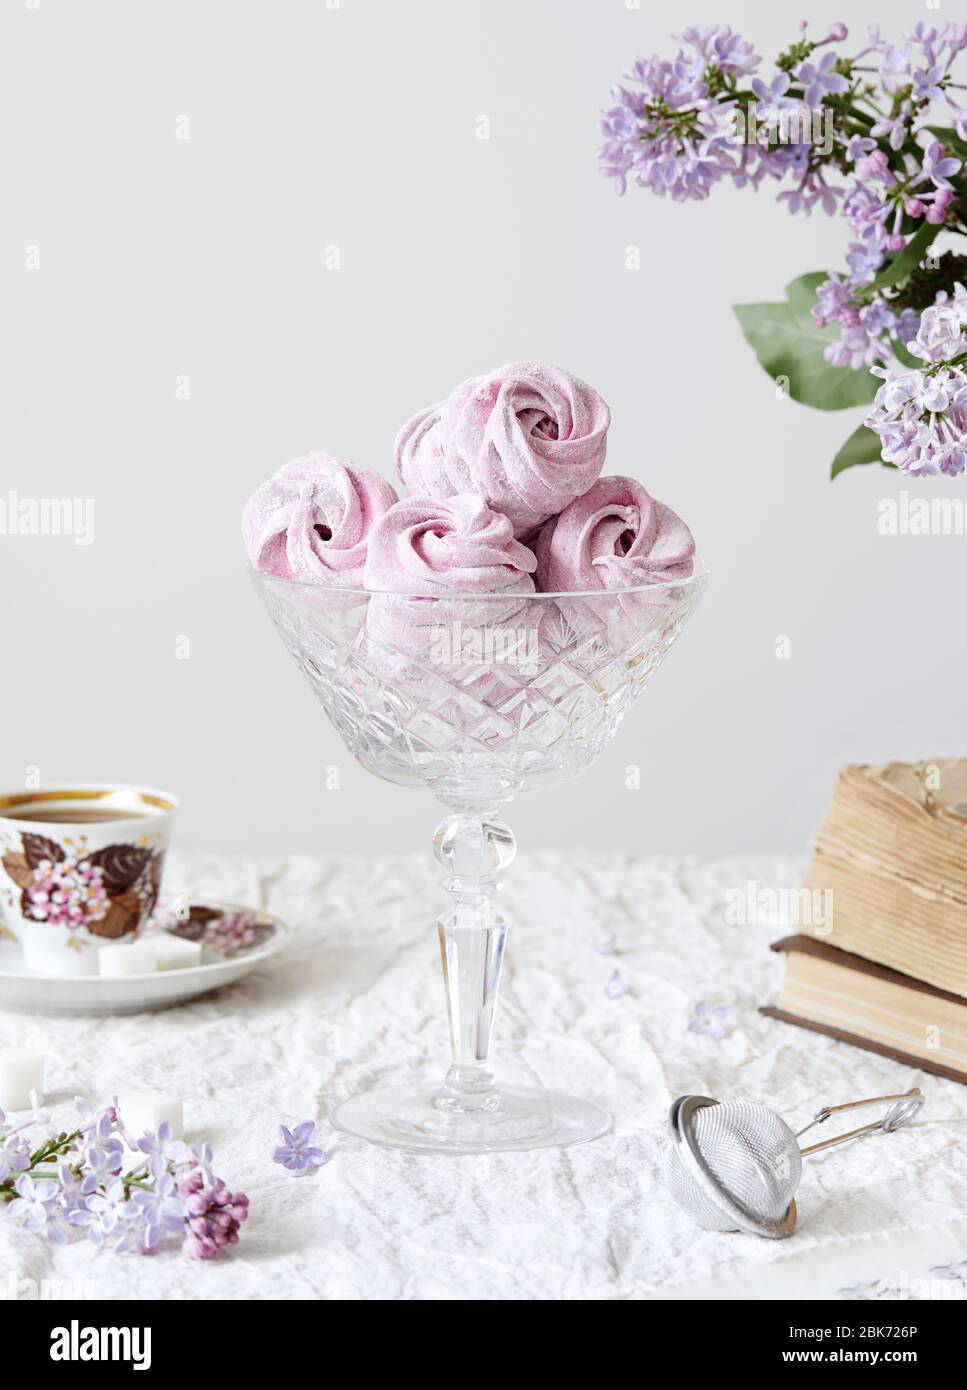 https://c8.alamy.com/comp/2BK726P/violet-sweet-homemade-zephyr-or-marshmallow-from-black-currant-near-lilac-flowers-old-books-and-cup-of-coffee-on-white-table-cloth-and-white-backgrou-2BK726P.jpg